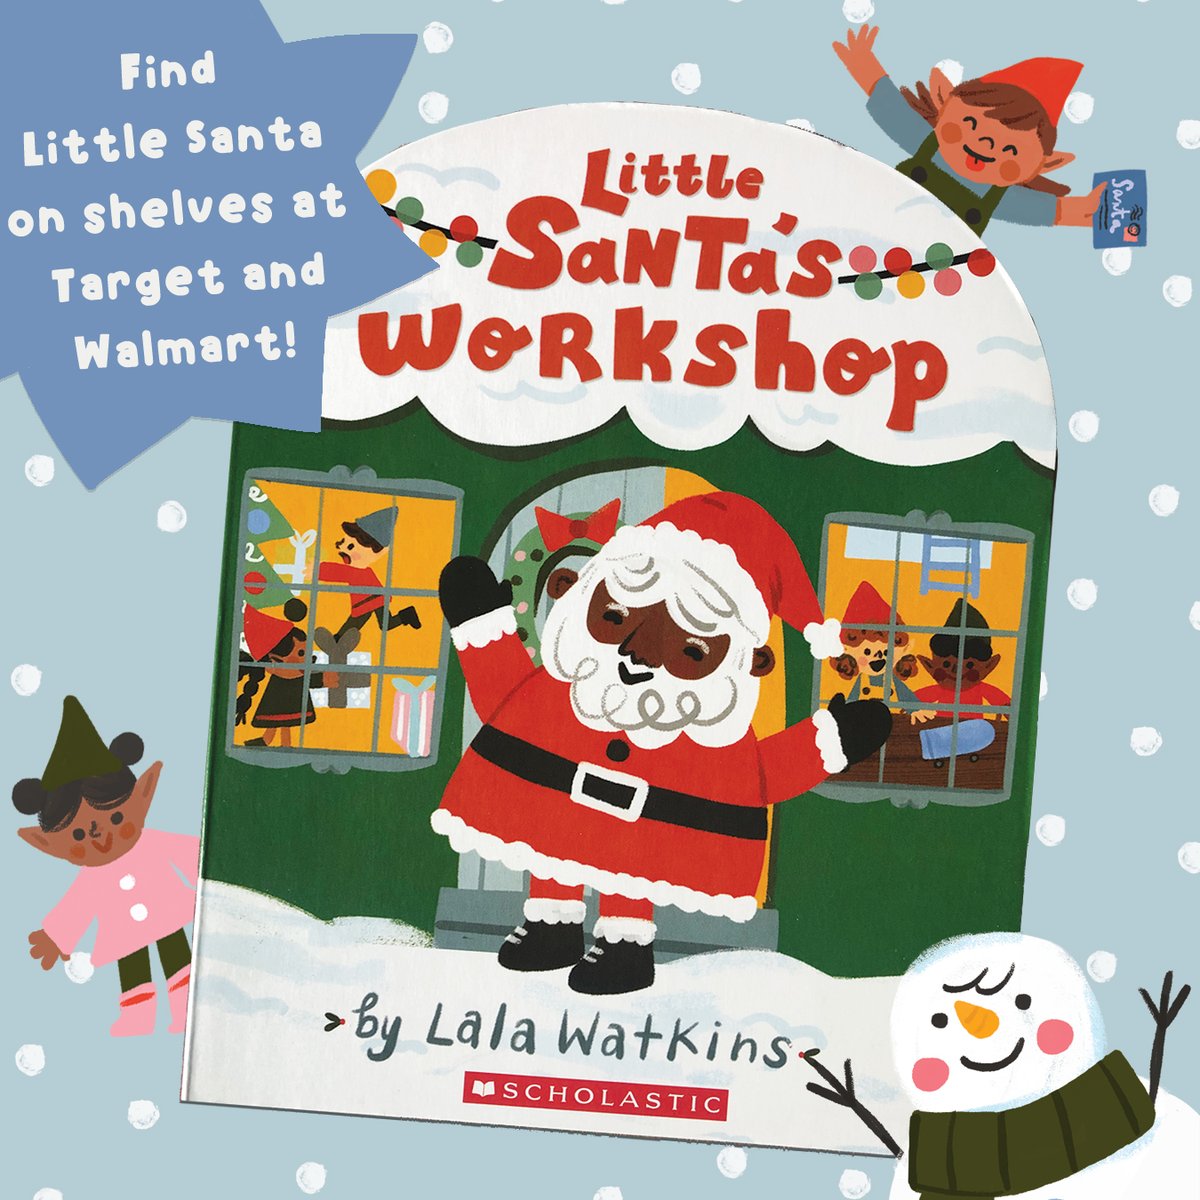 Exciting announcement! You can find Little Santa on shelves this month at Target and Walmart! 🥰😍 If you spot Santa--pls take a pic and share, I love seeing it! Thank you to those that have spotted Santa and let me know. #blacksanta #kidlit #Santa #scholastic